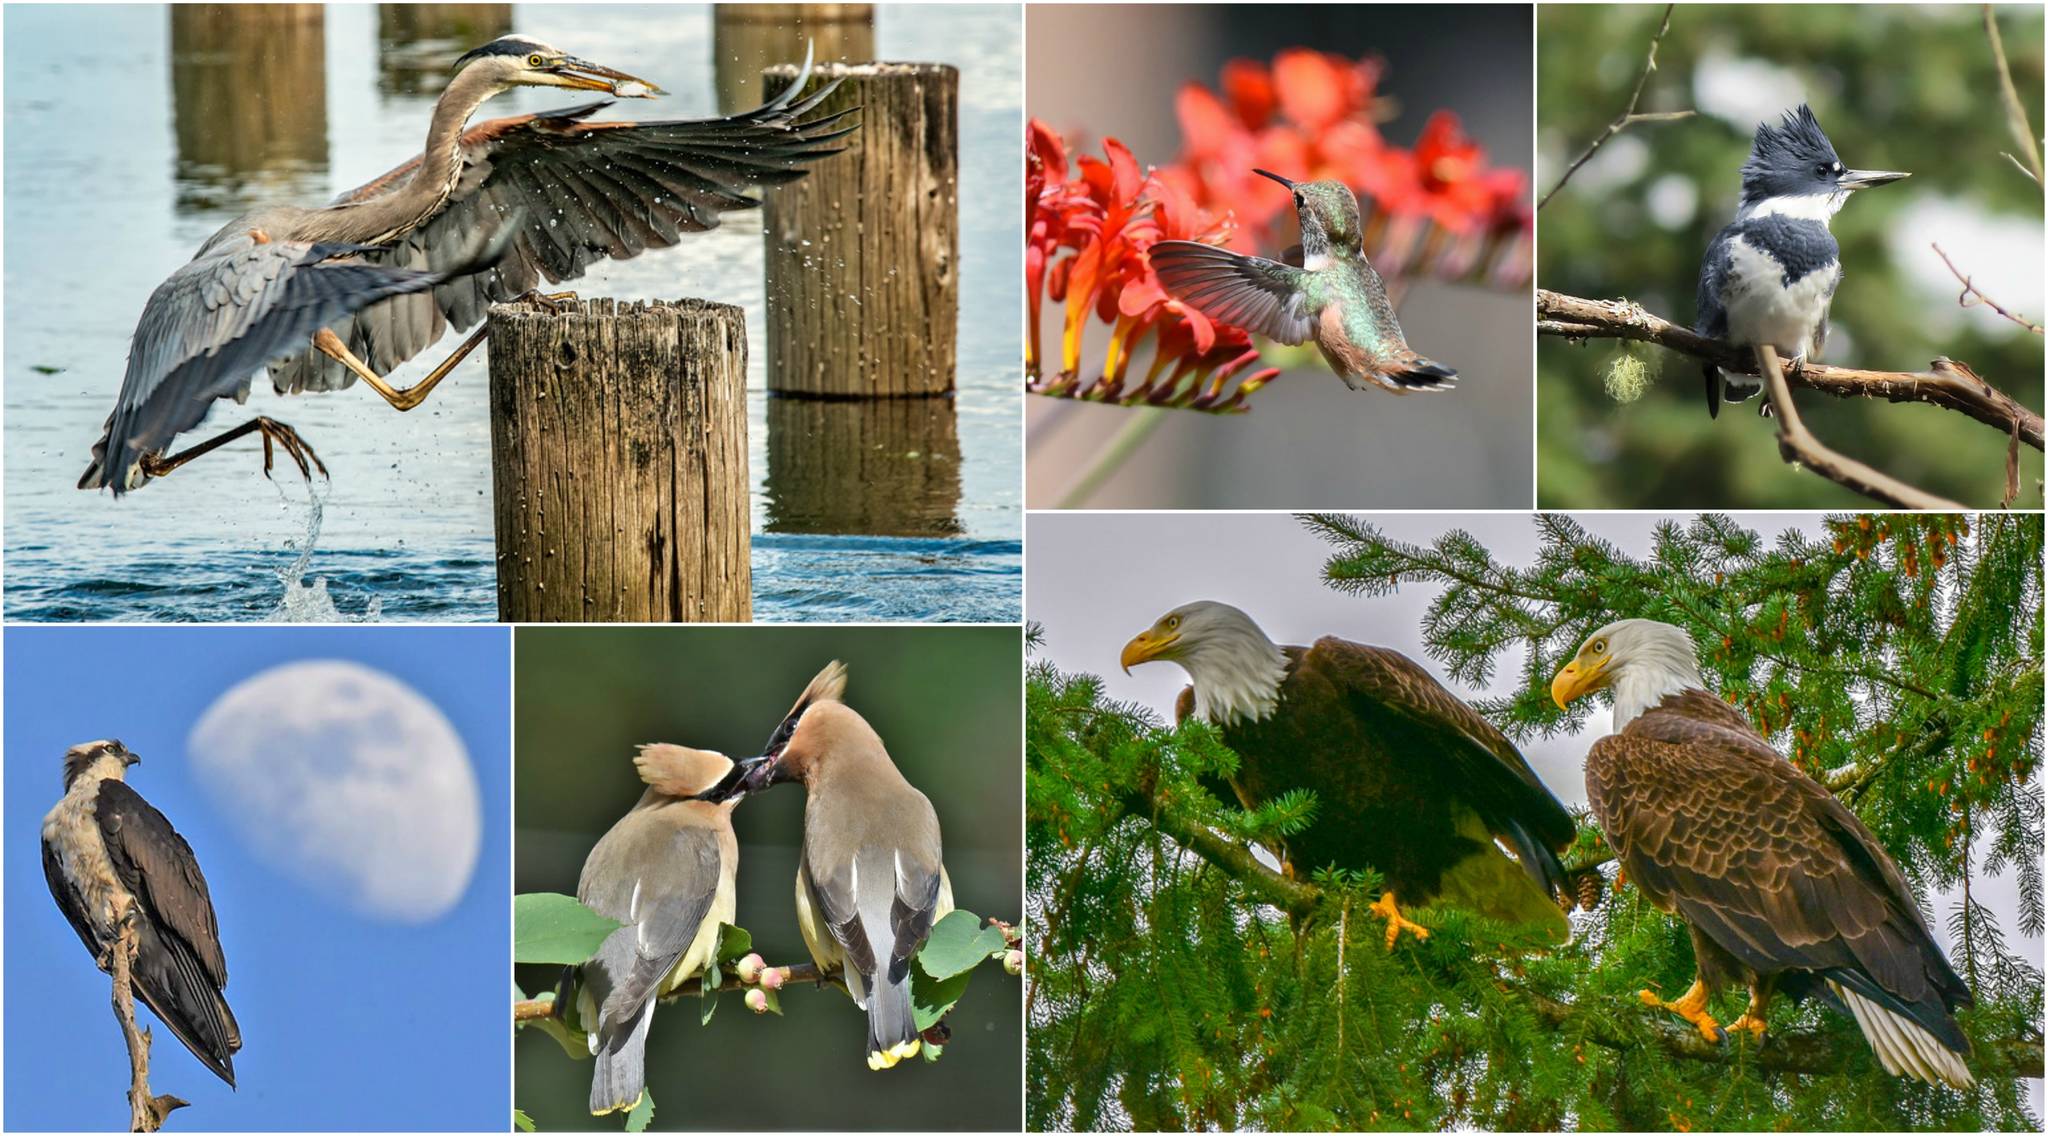 Island birds, clockwise from top left, include a great blue heron by Harvey Bergman, rufous hummingbird by Jim Diers, kingfisher by Sarah Driggs, bald eagles by Alice Burns, cedar waxwings by Jim Diers and an osprey by Jim Diers.